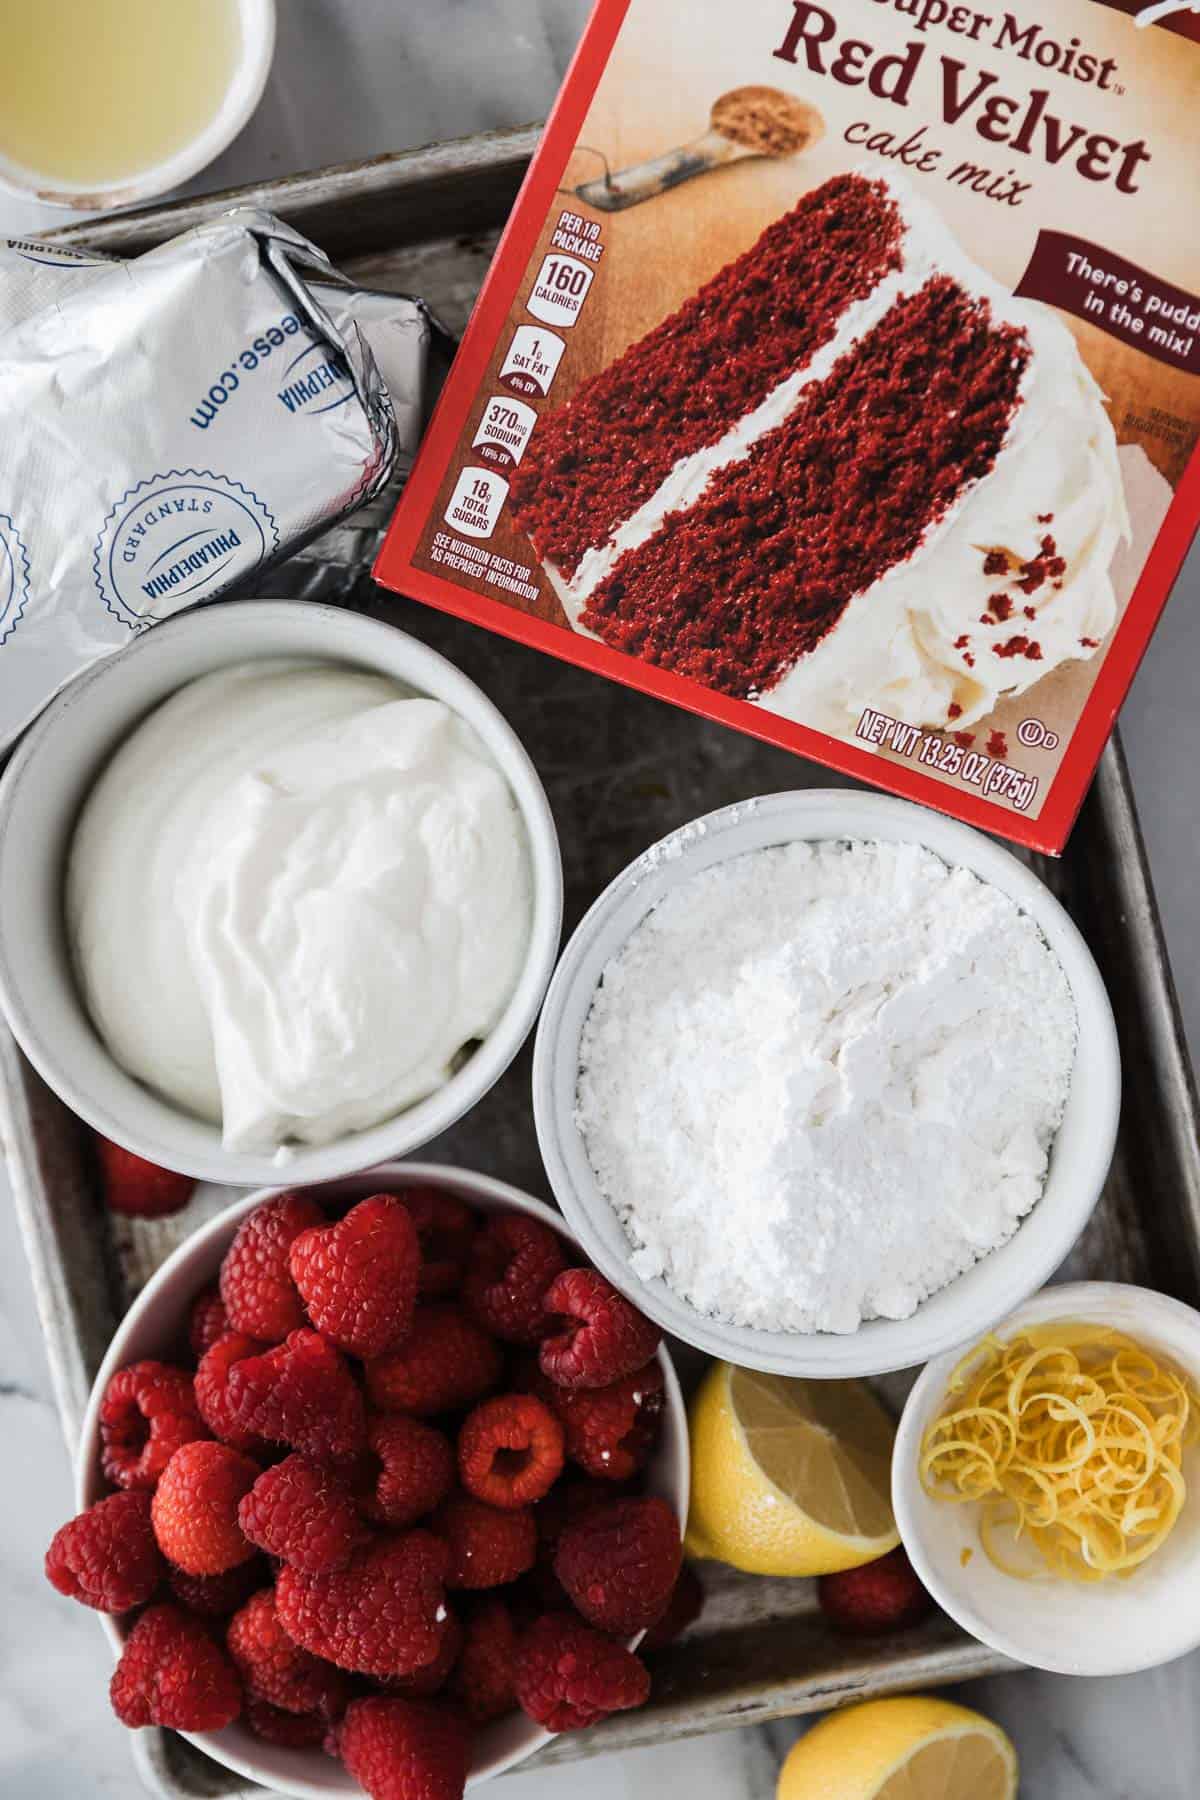 Ingredients for the red velvet trifle on a baking tray. 